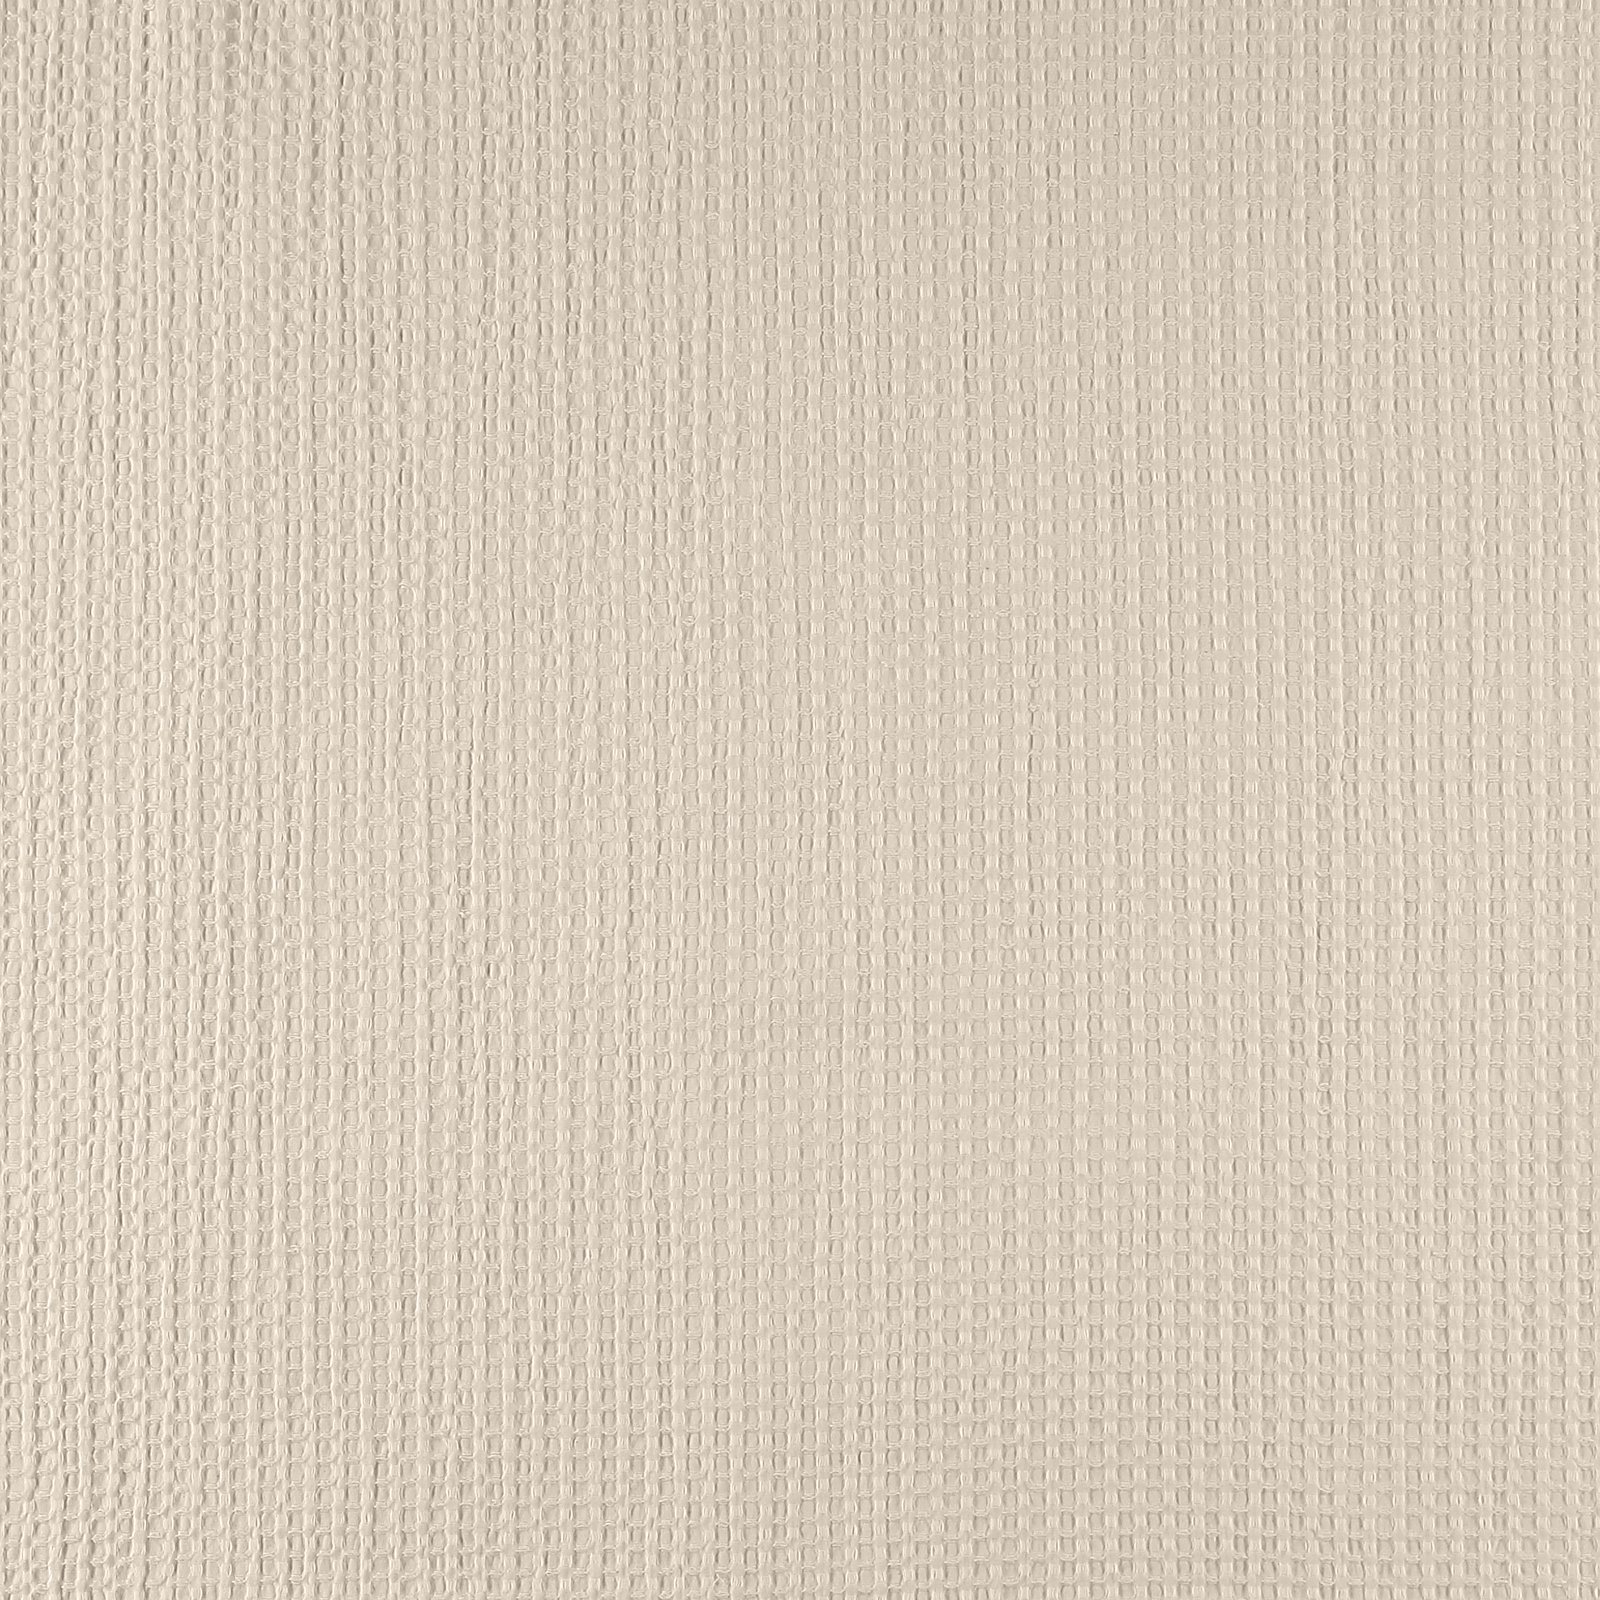 Woven jacquard unbleached w structure 501915_pack_solid